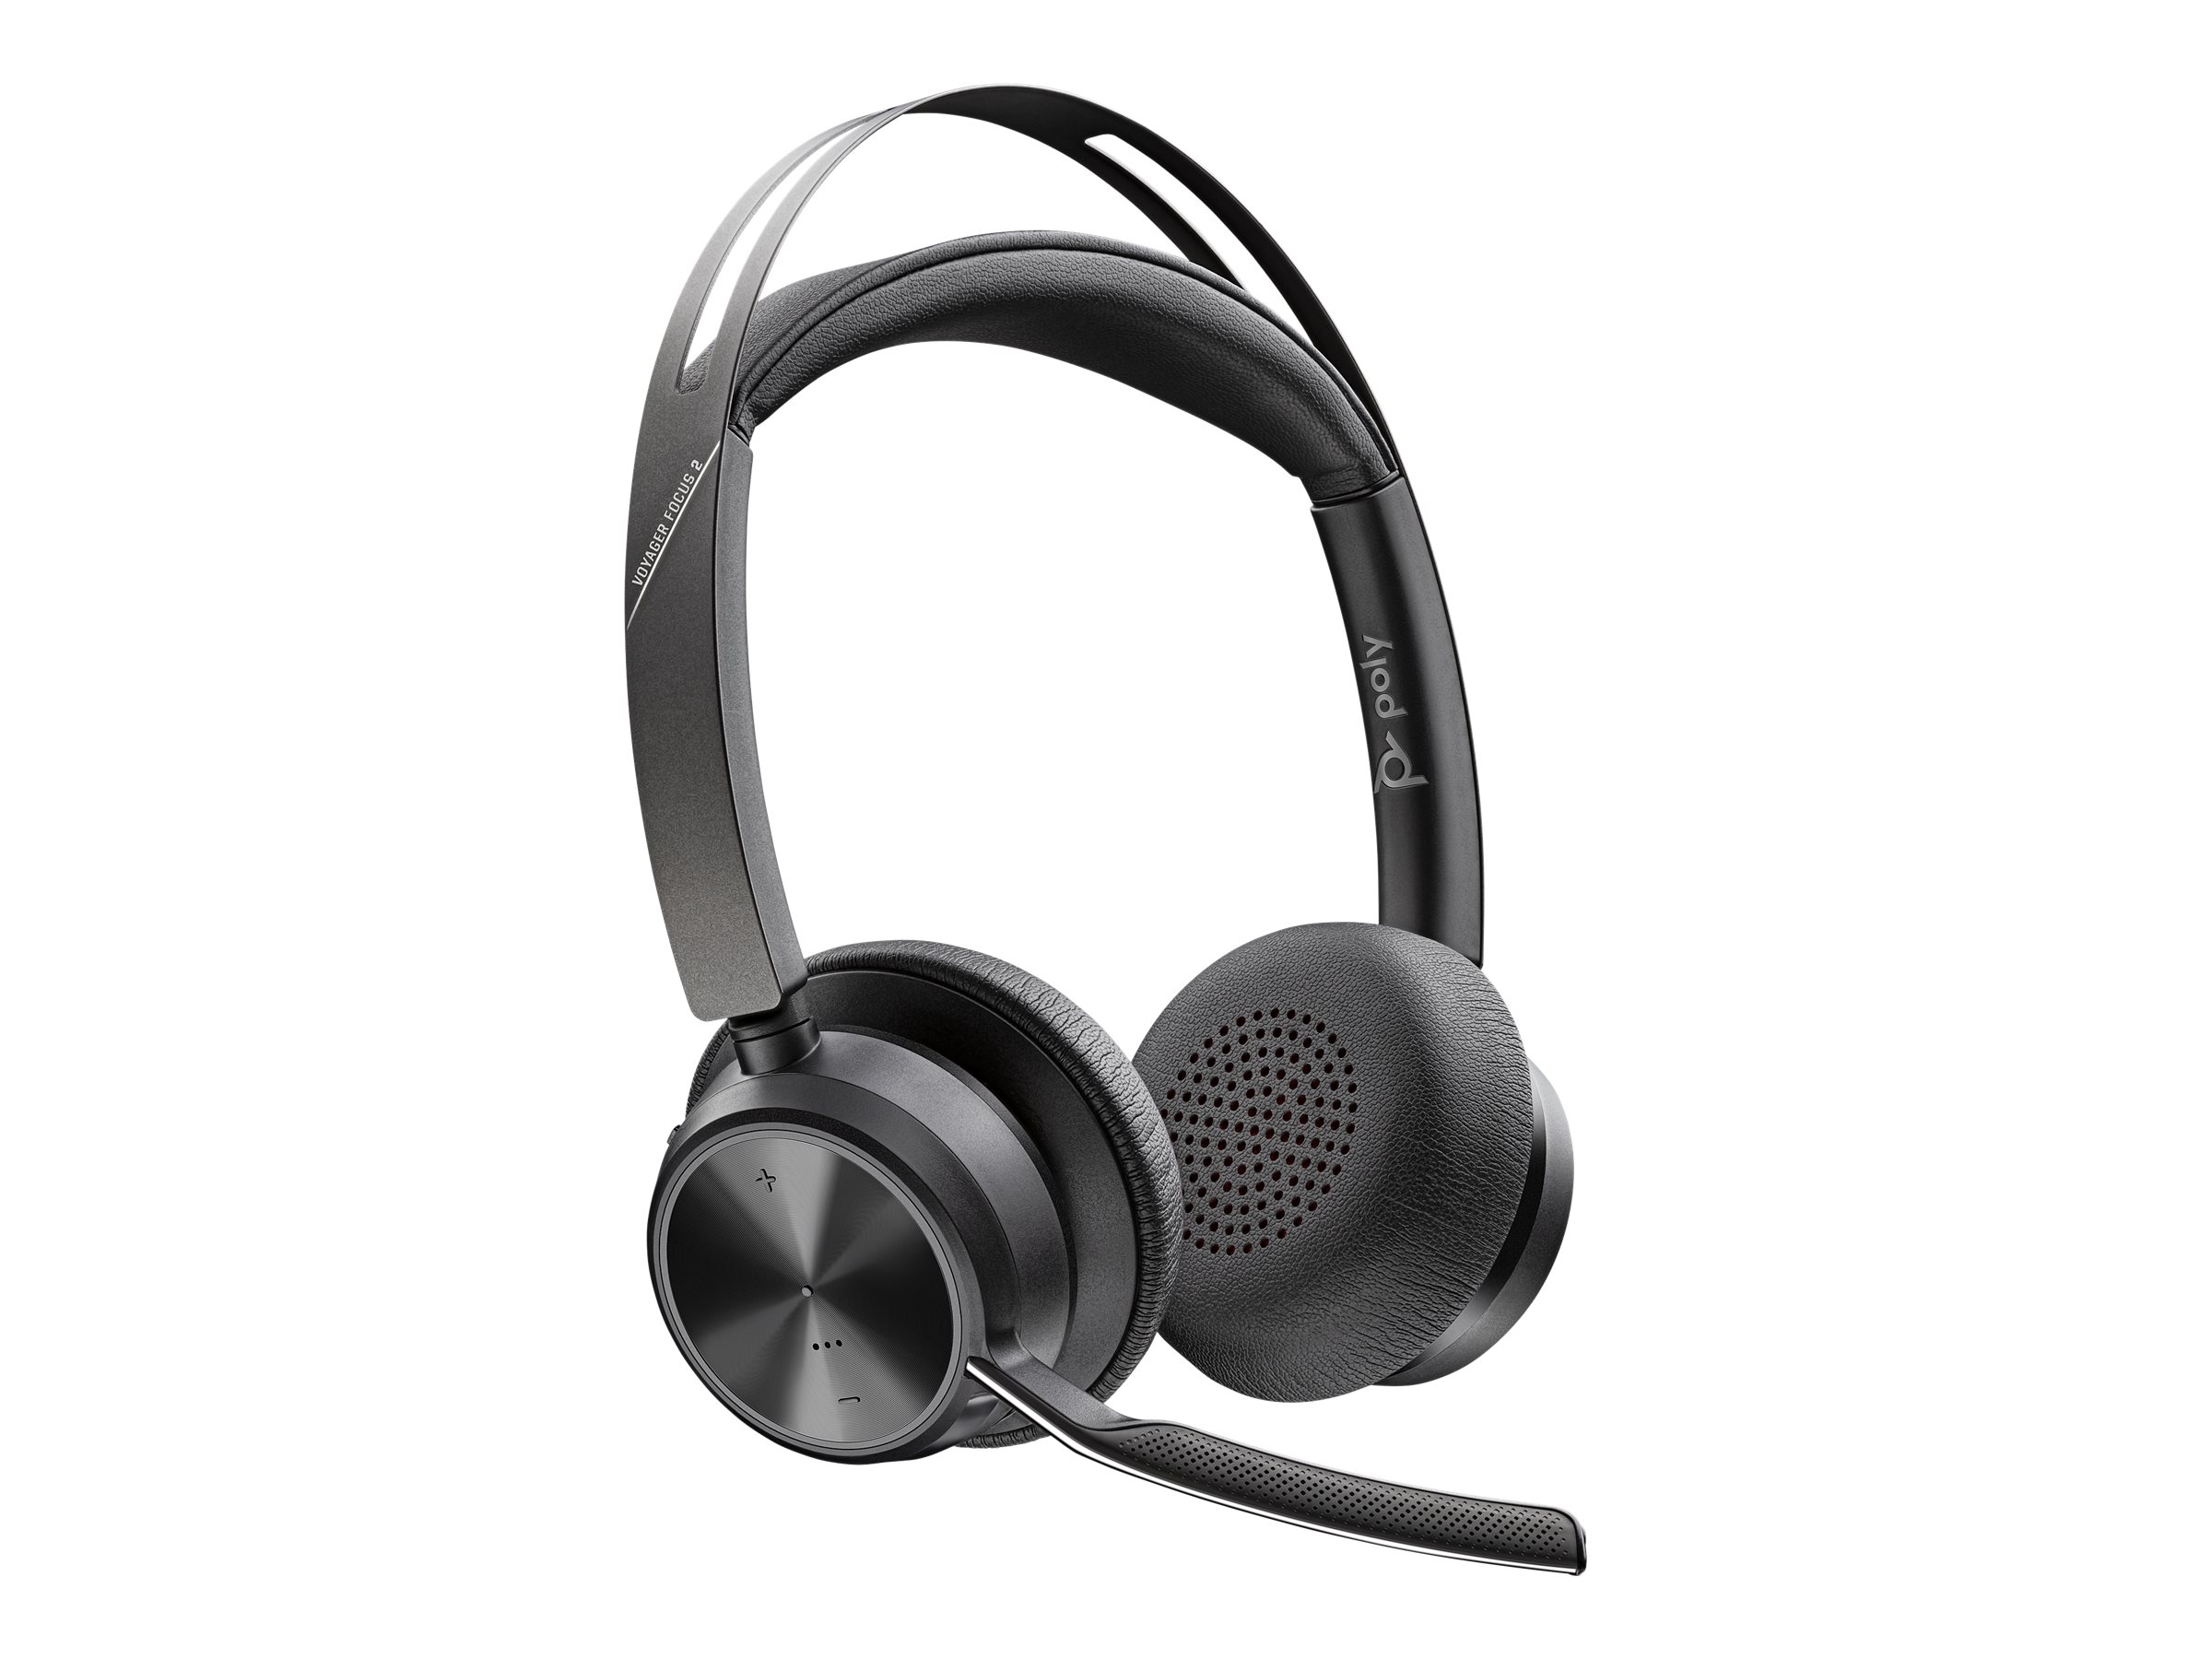 Poly Voyager Focus 2 UC - Headset - On-Ear - Bluetooth